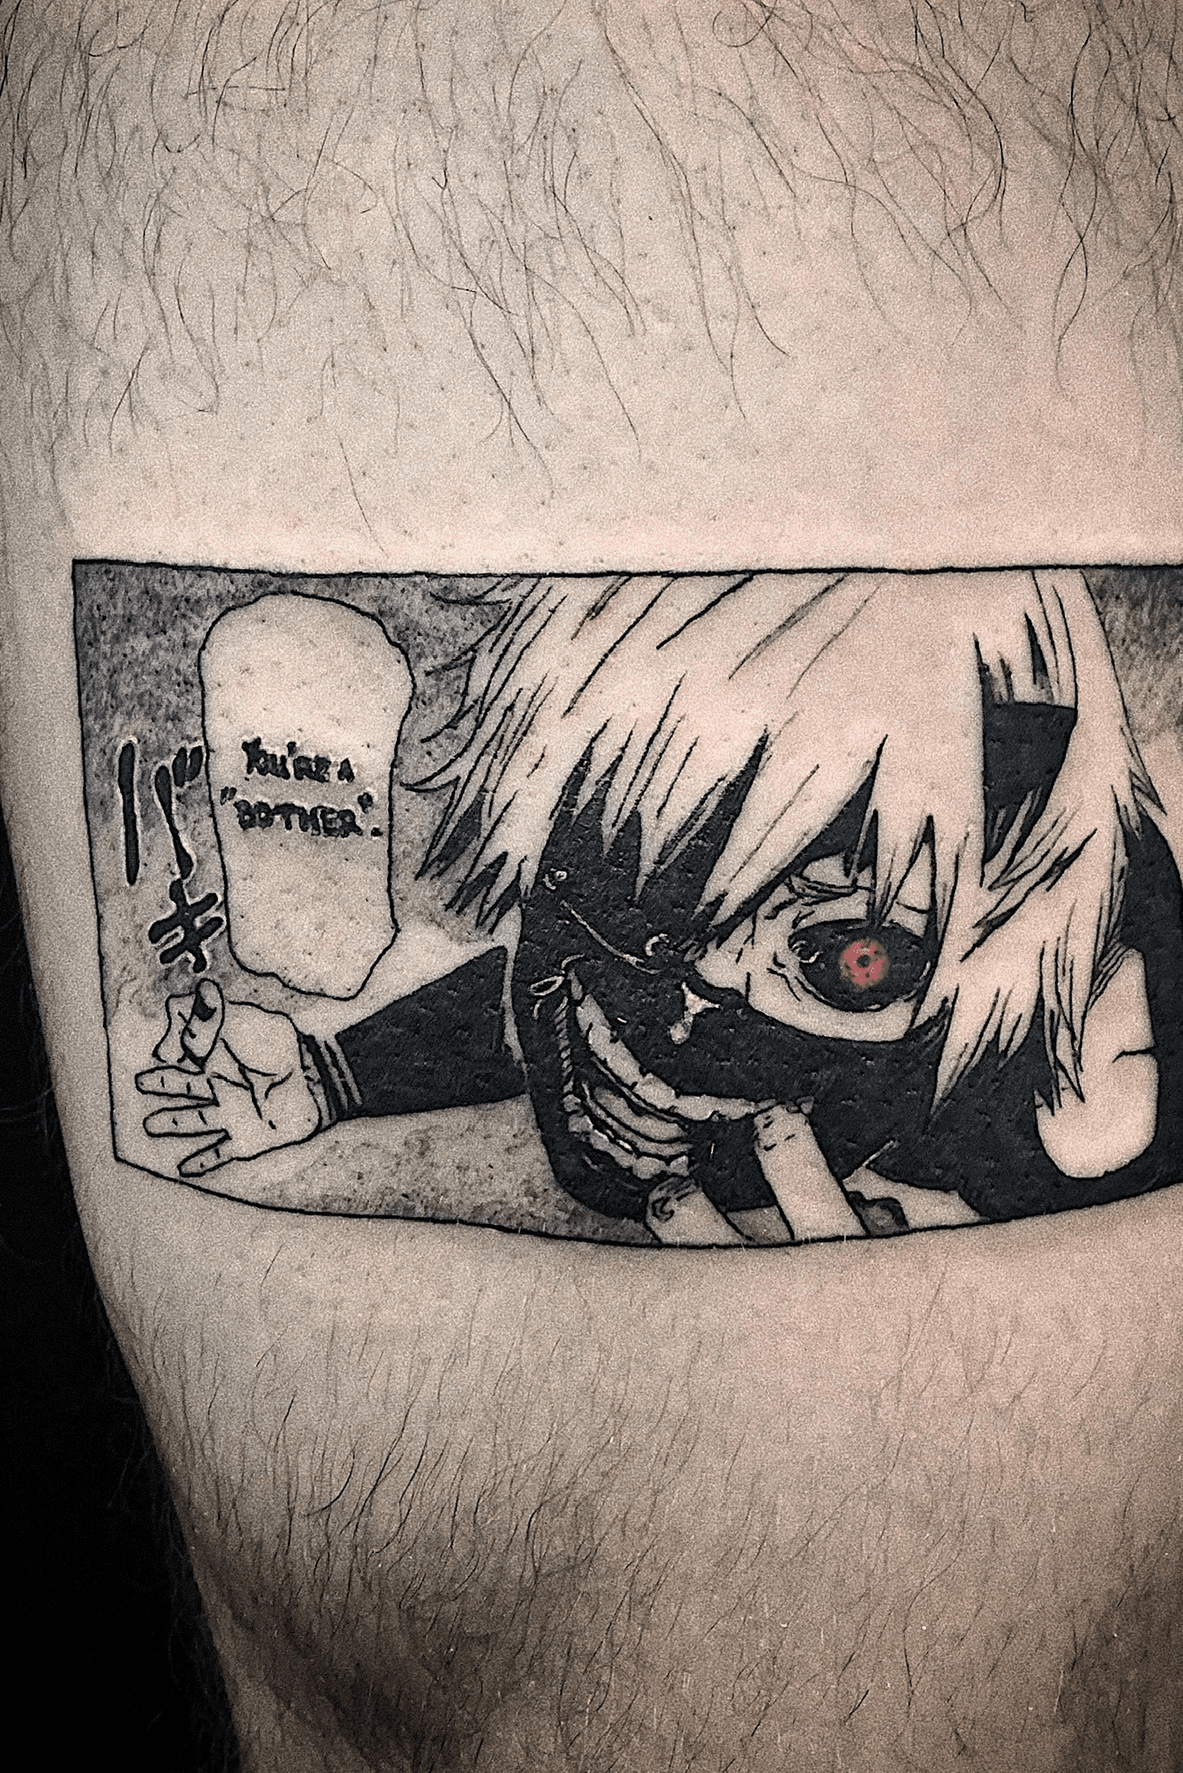 Ken Kaneki  Artist stoneartmtl  Bookings CLOSED  Dm us or email  stoneartmtlgmailcom for inquires     tattoo tattoos  Instagram